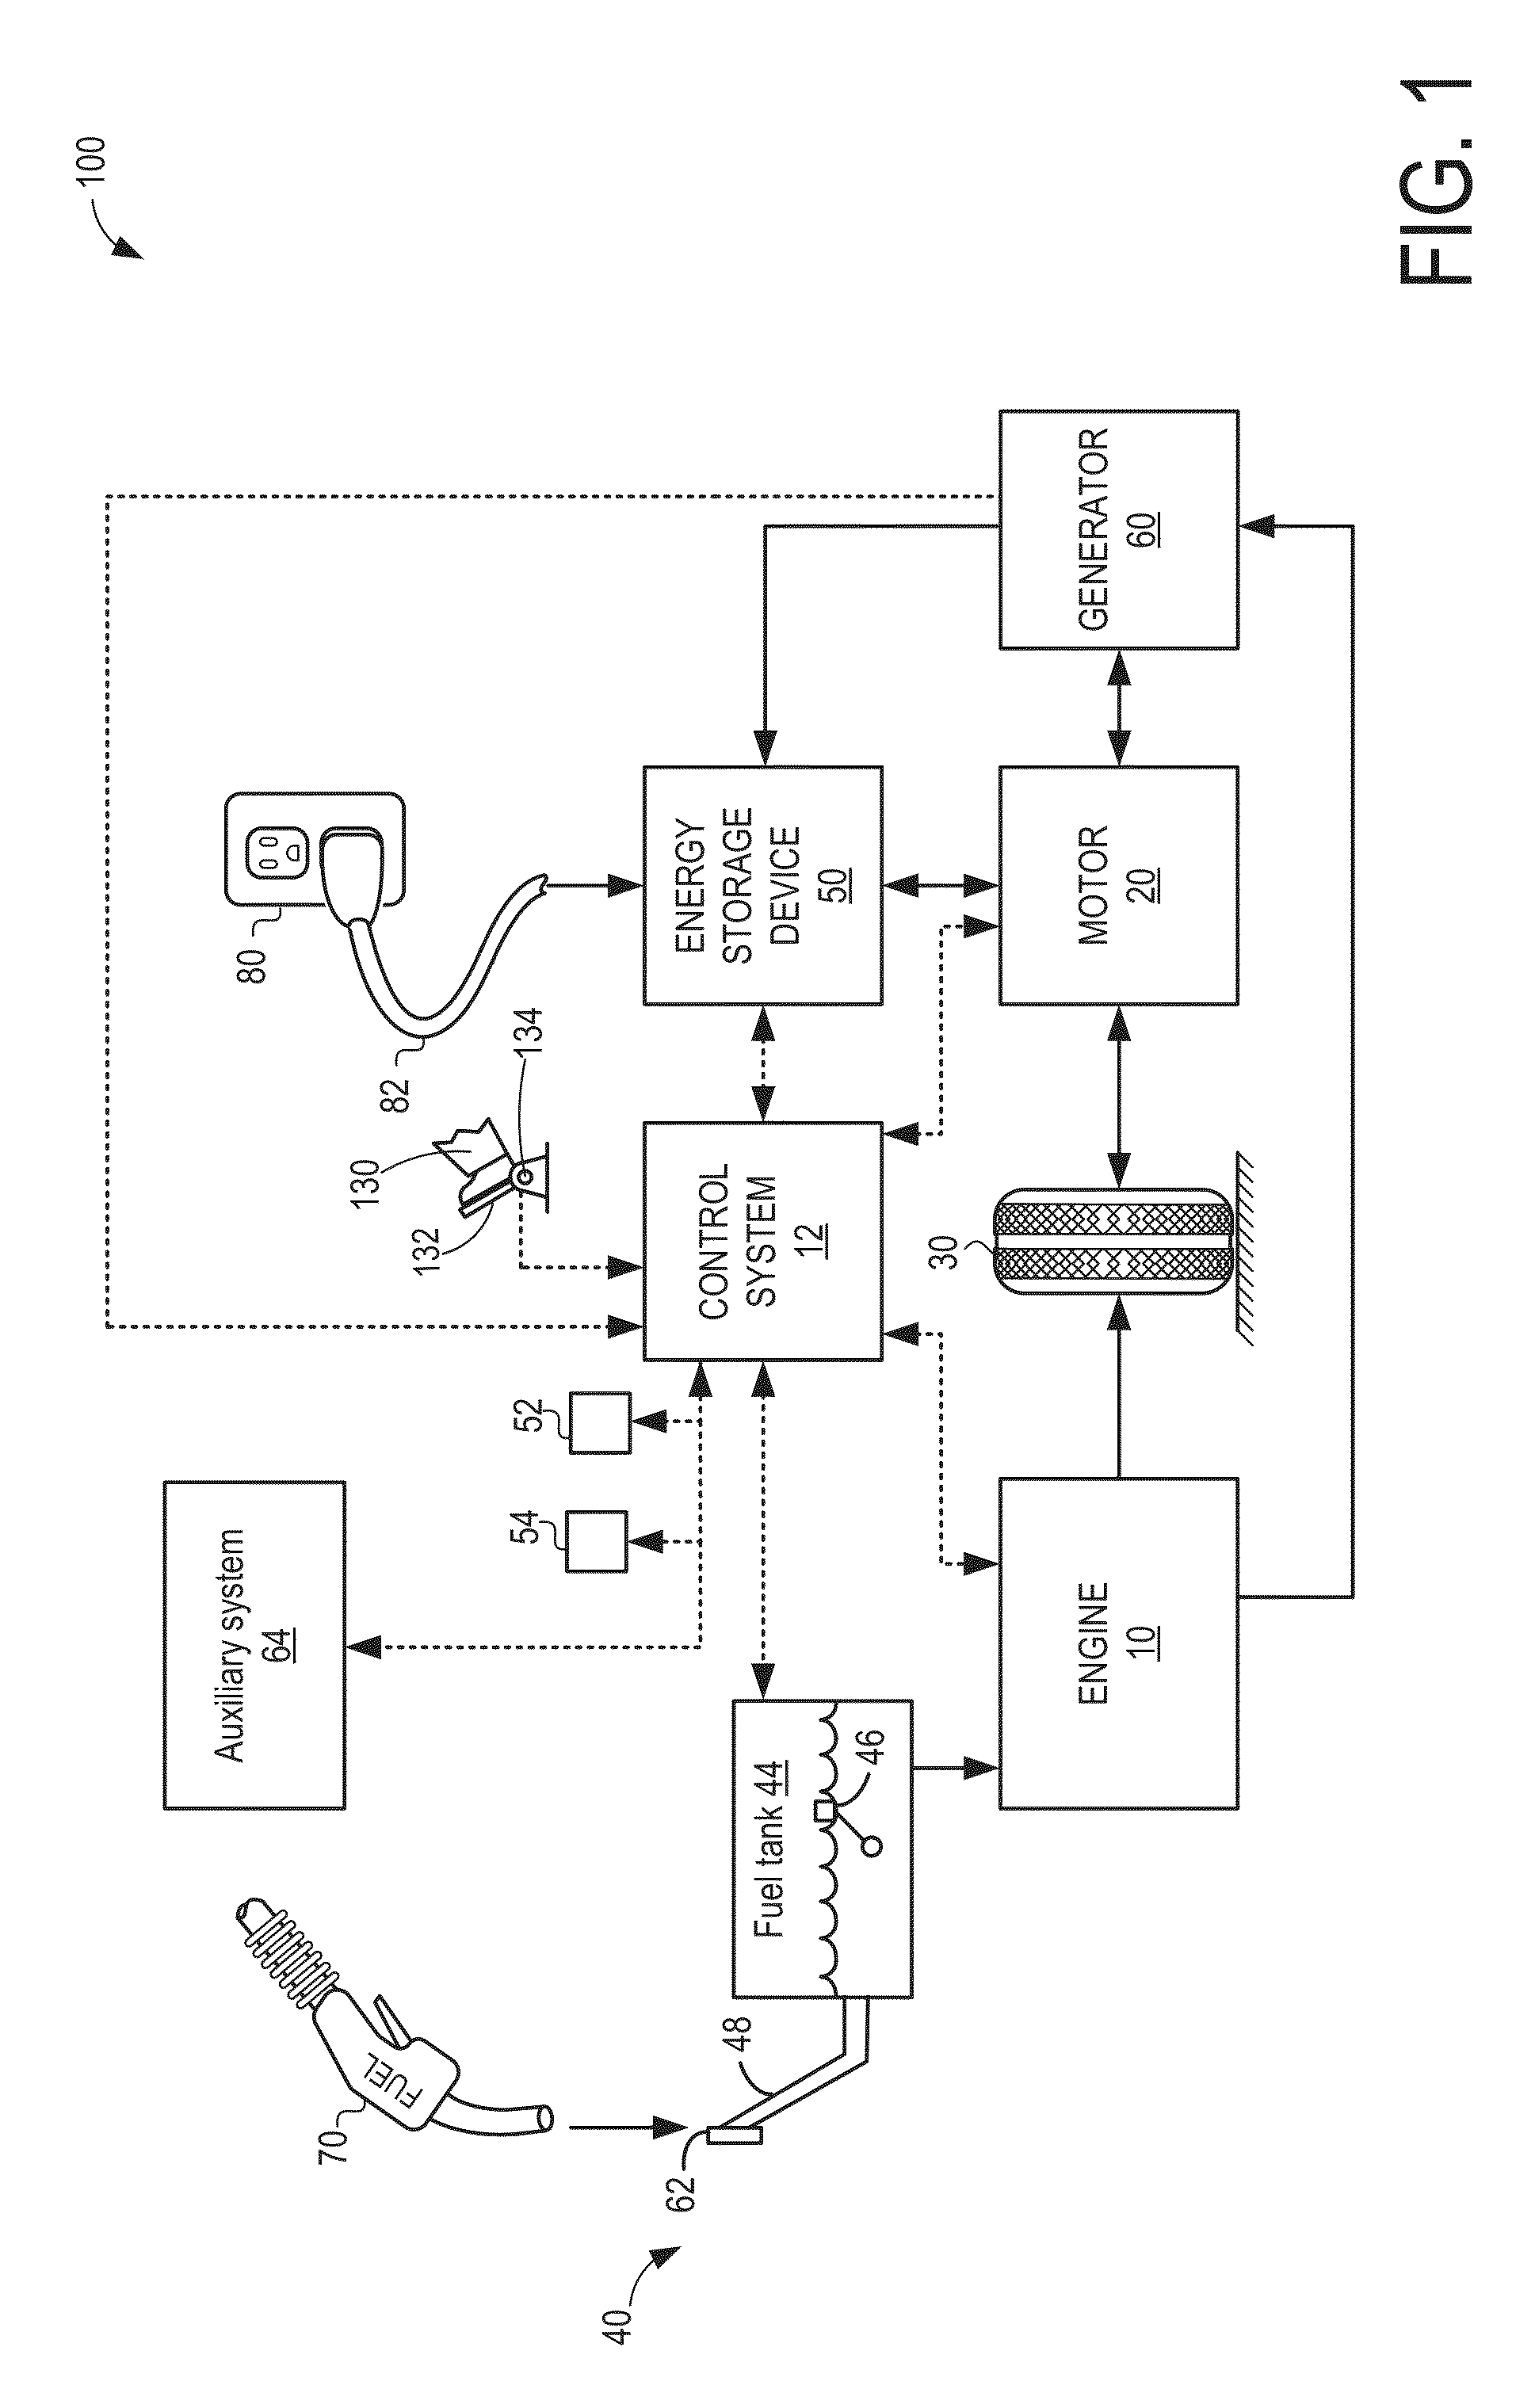 Method and system for oil dilution control